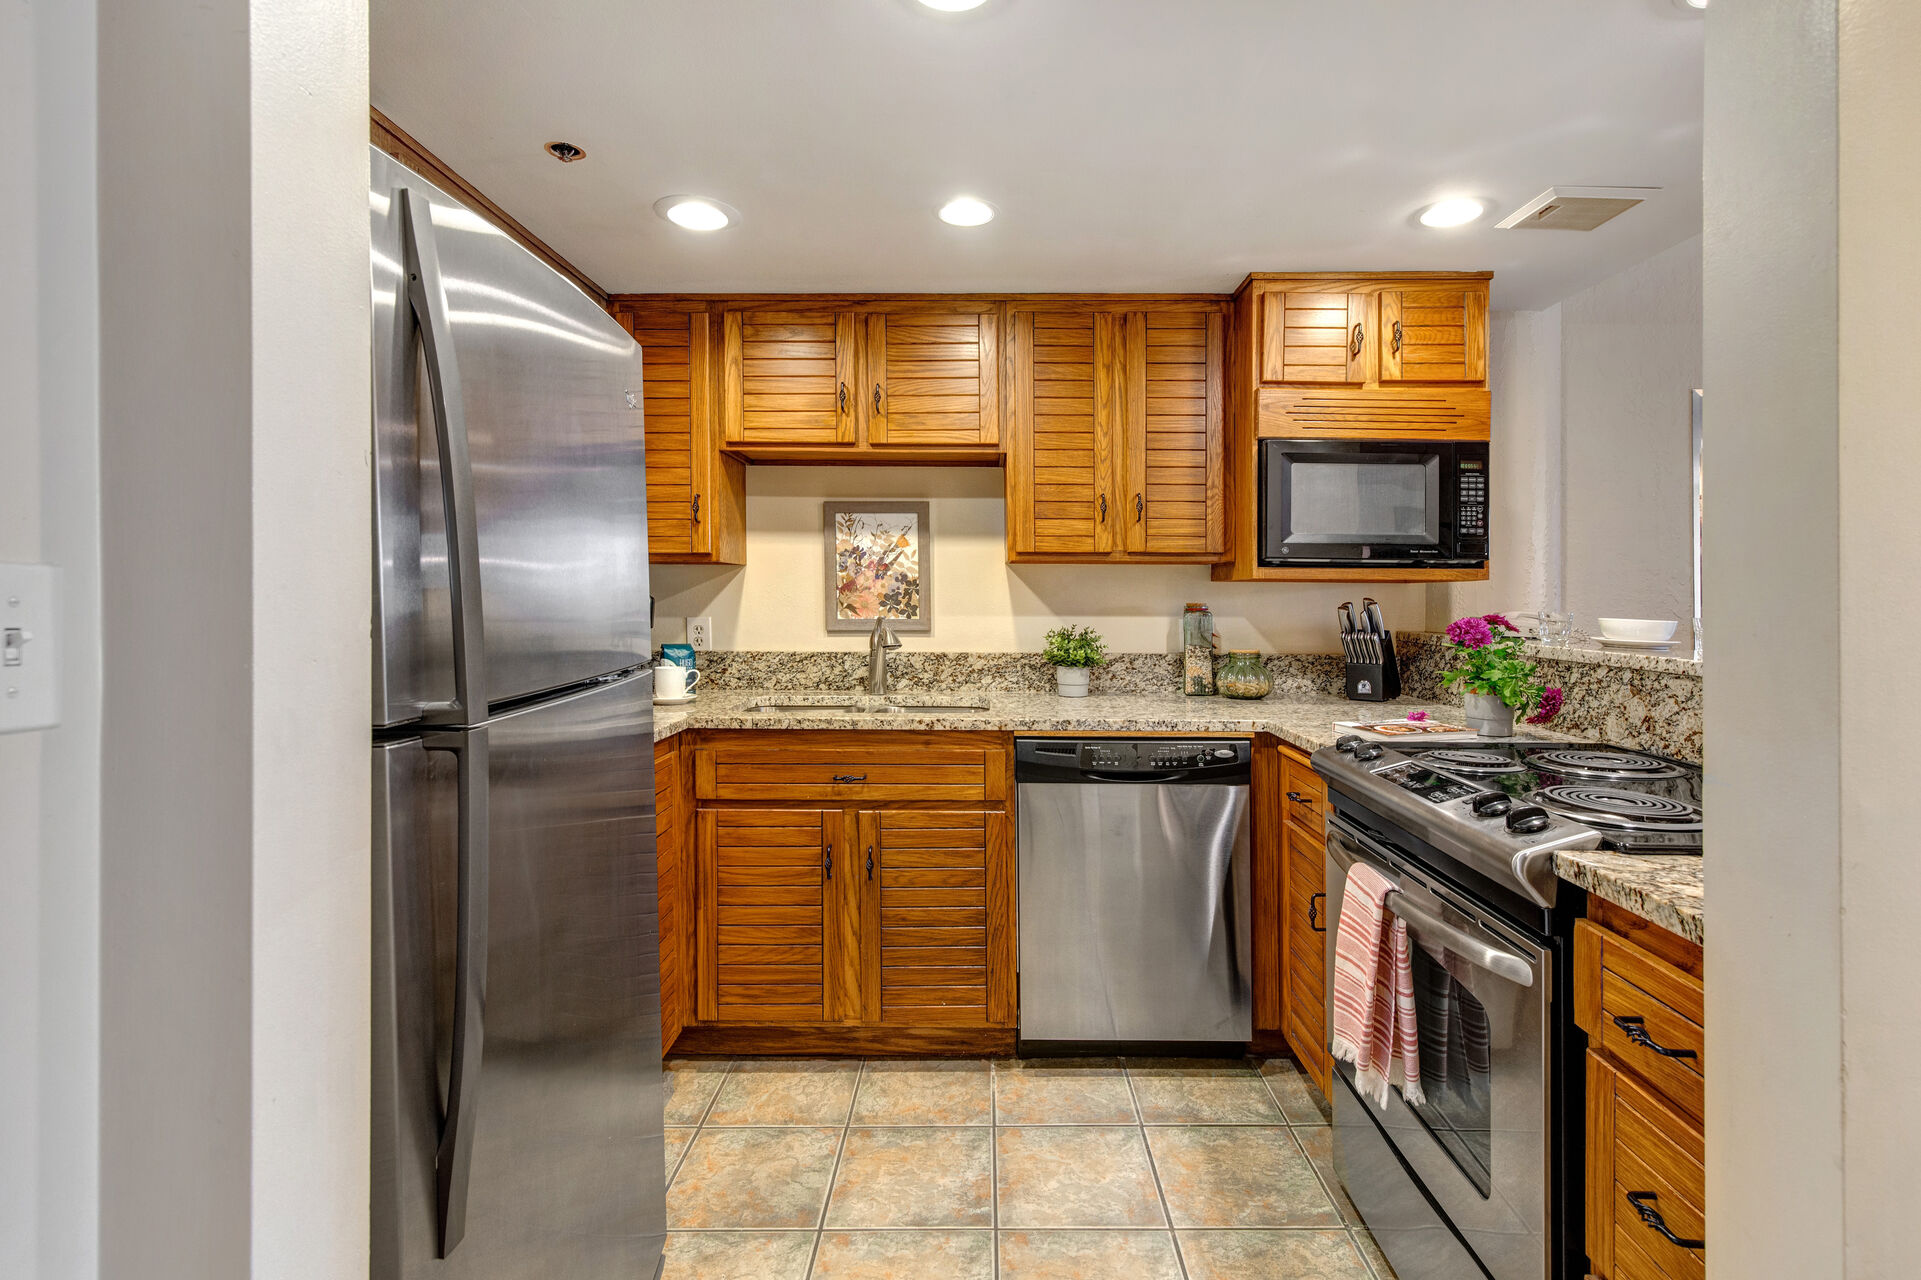 Fully Equipped Kitchen with stone countertops, stainless steel appliances, and bar seating for three